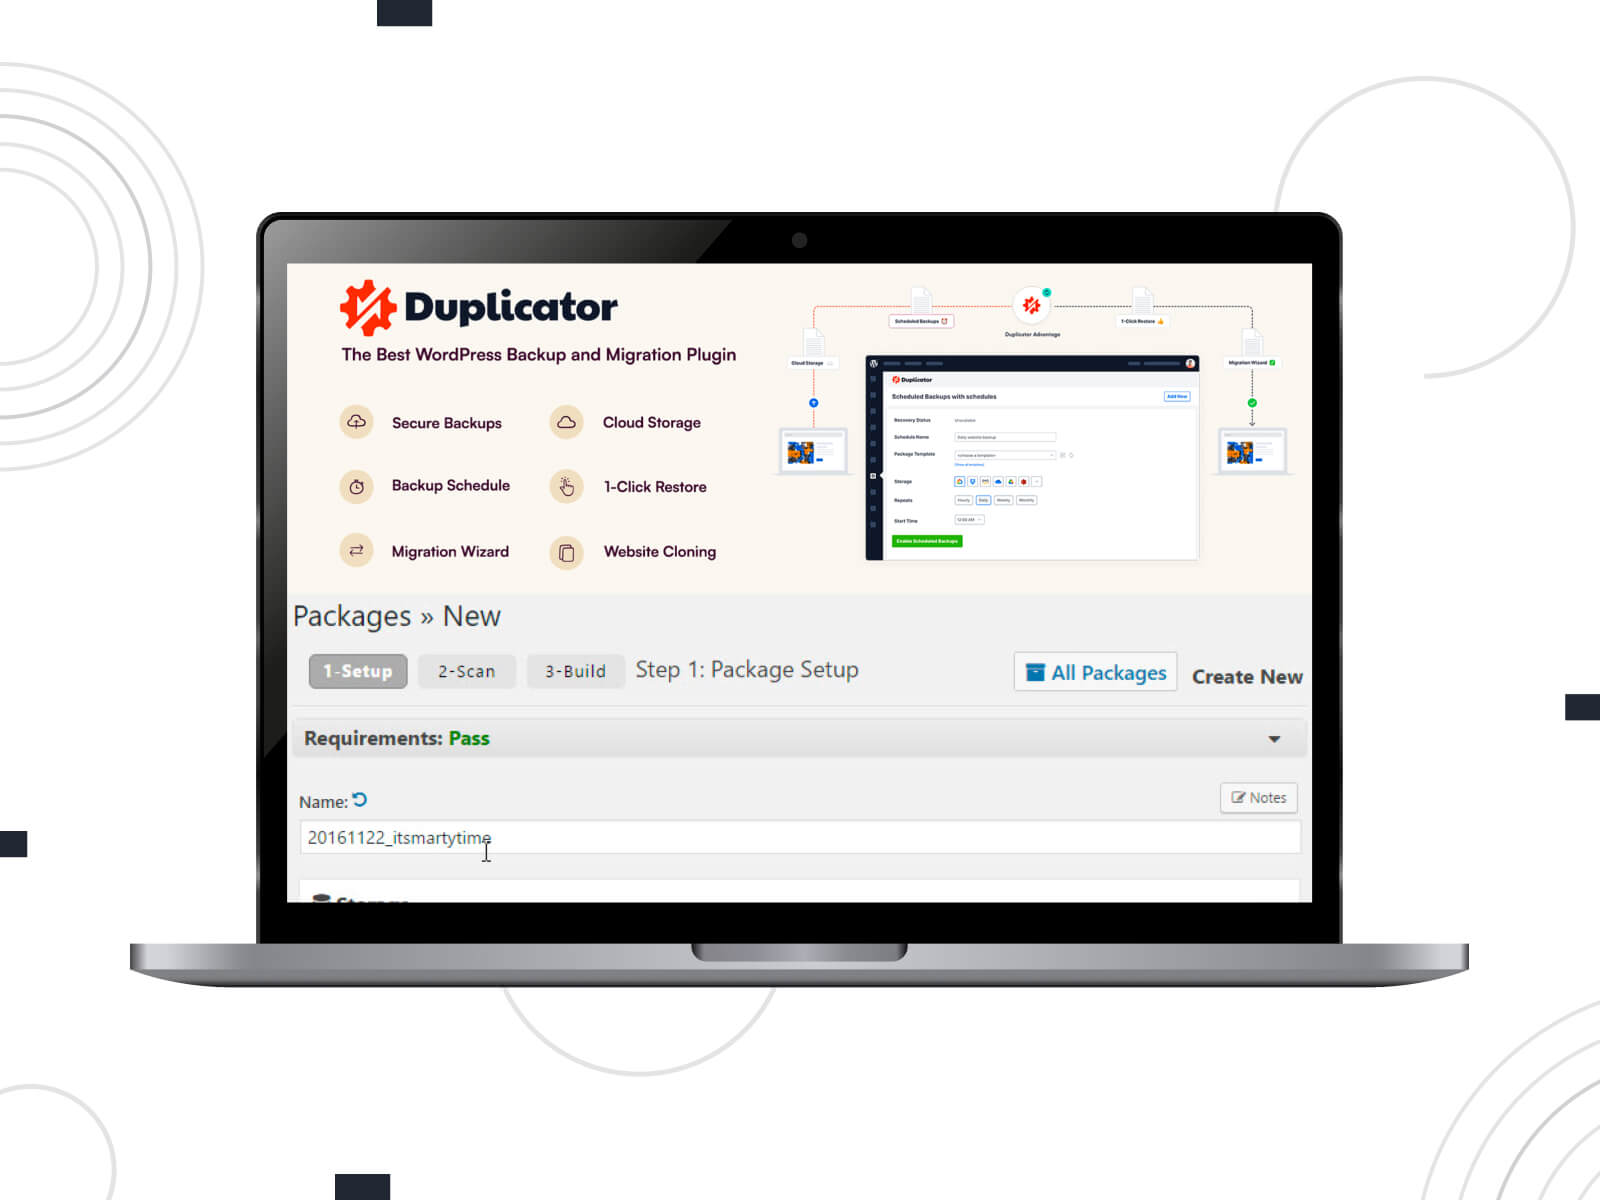 Picture of Duplicator, a WordPress plugin for backup and migration.